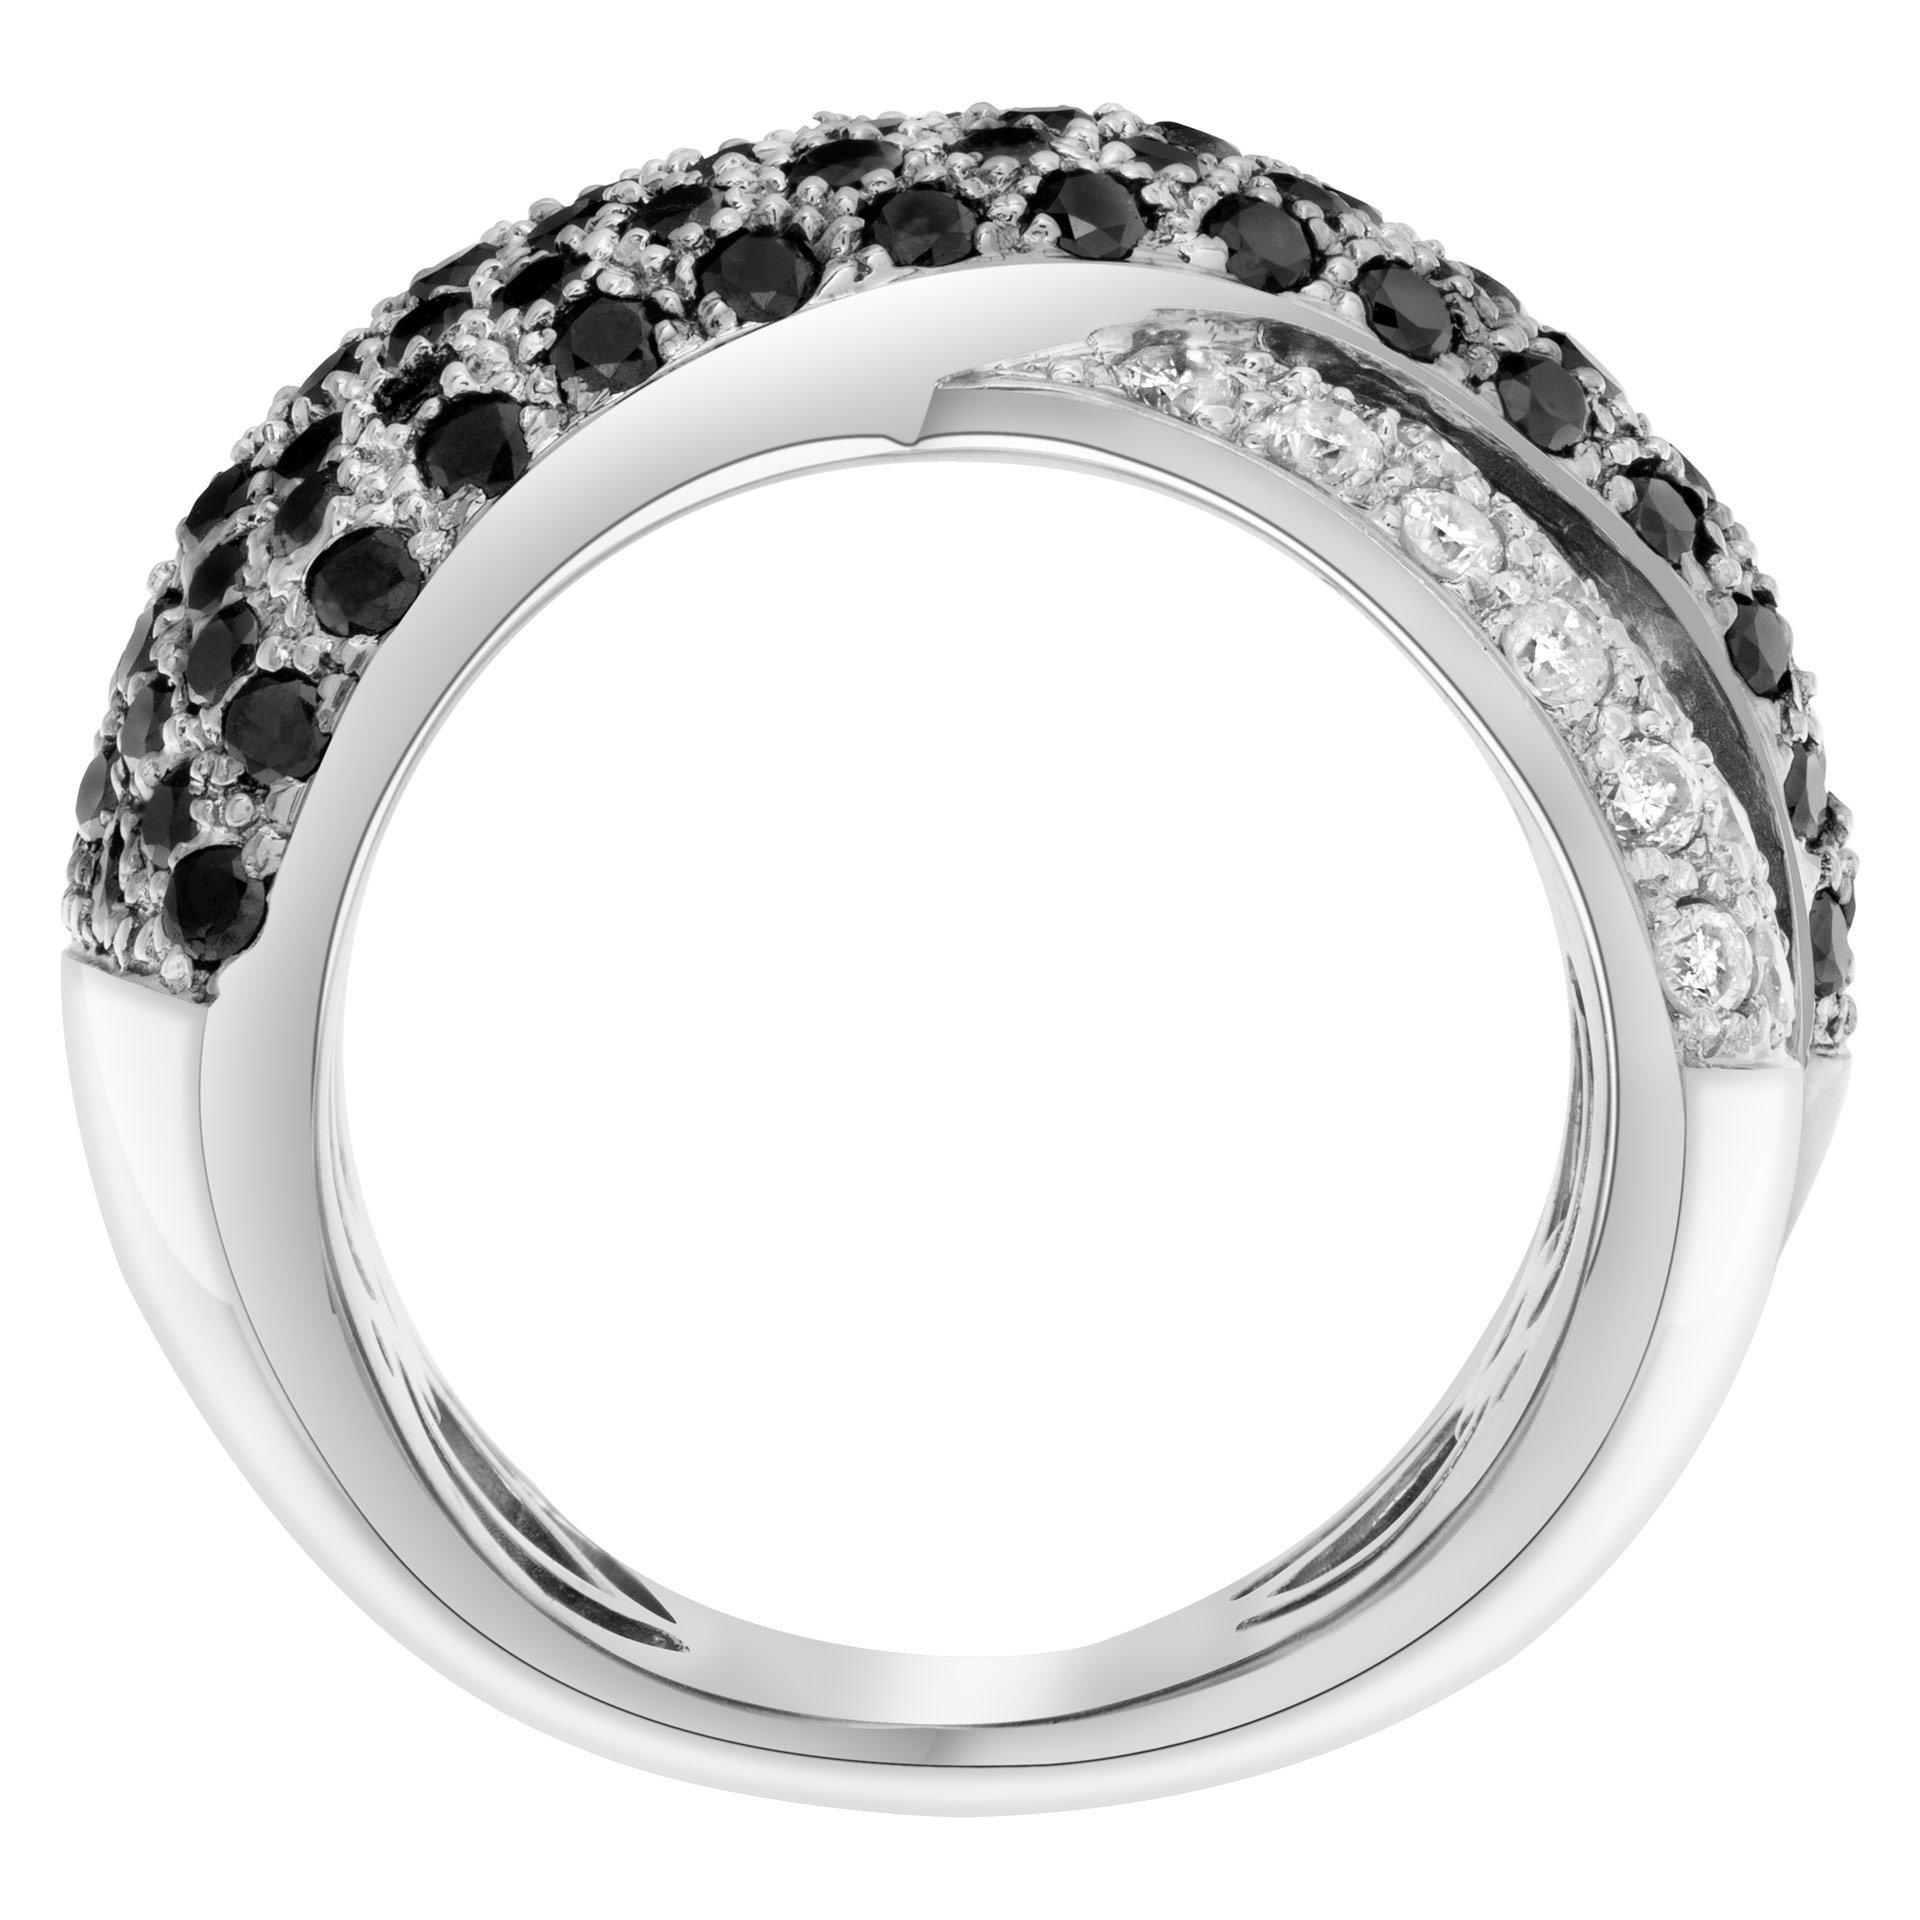 Black and White Diamond X Kiss Ring in 14k White Gold over 1.5 Cts In Excellent Condition For Sale In Surfside, FL